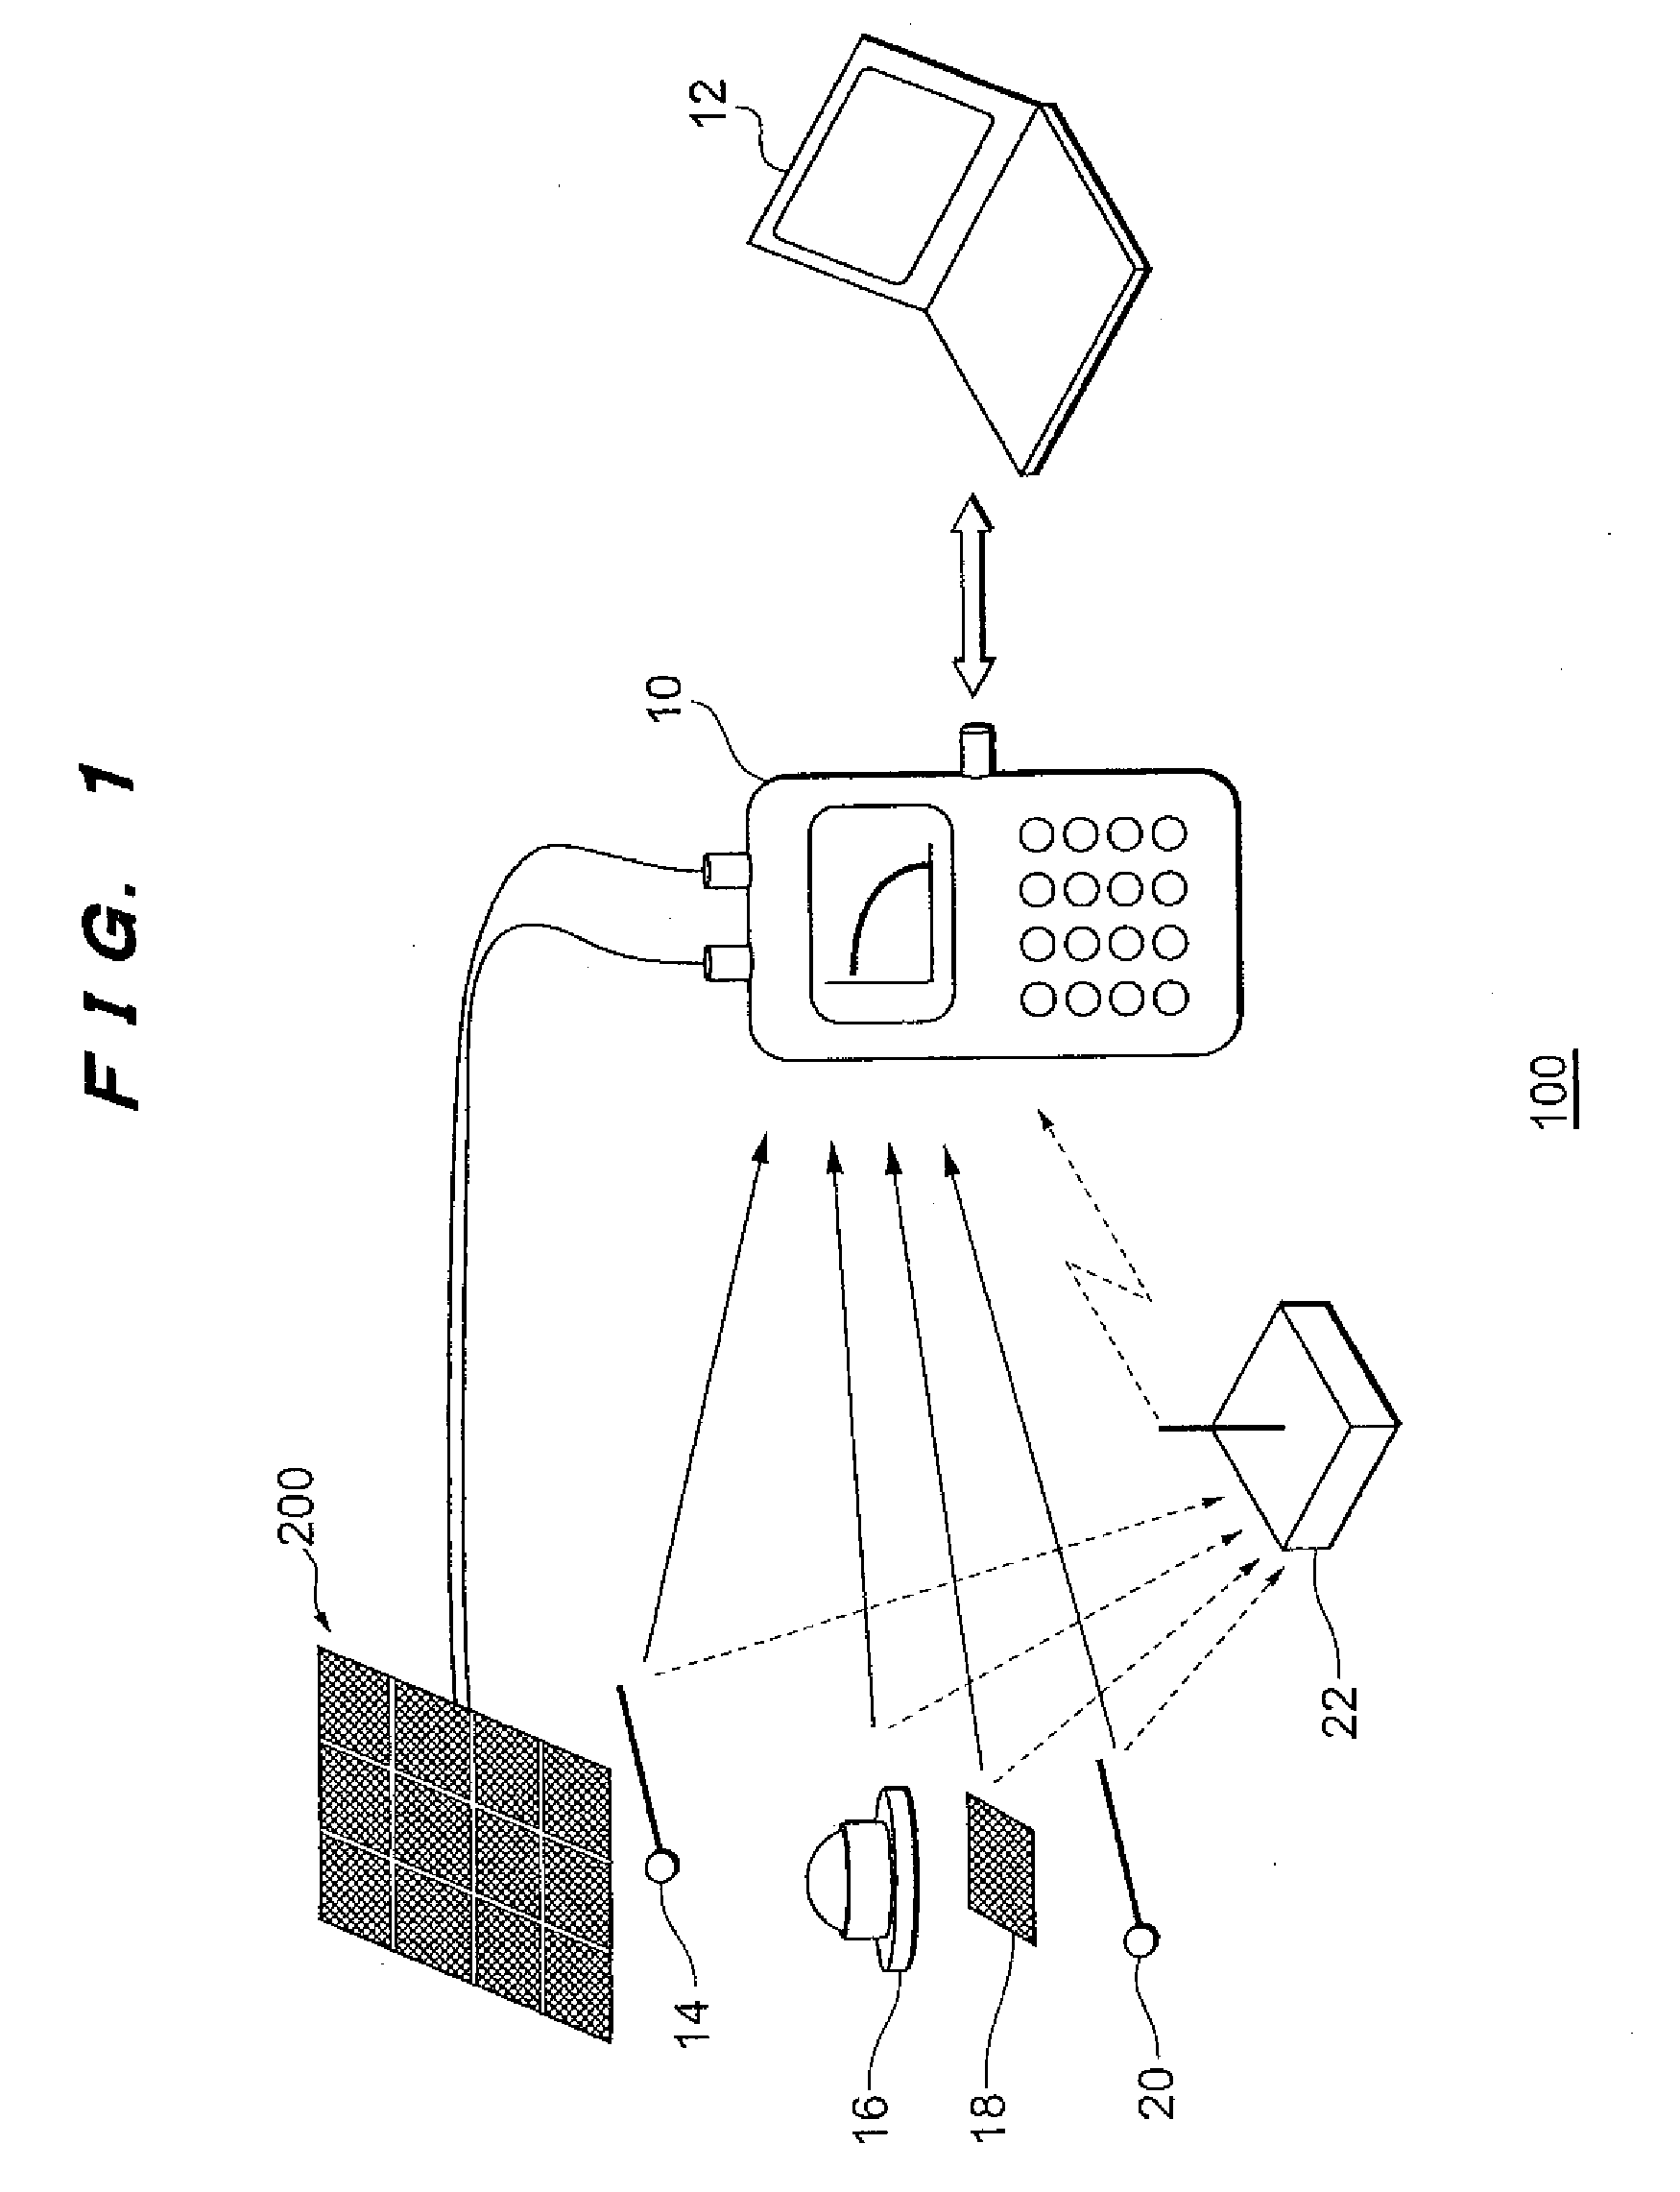 Photovoltaic Device Characterization Apparatus